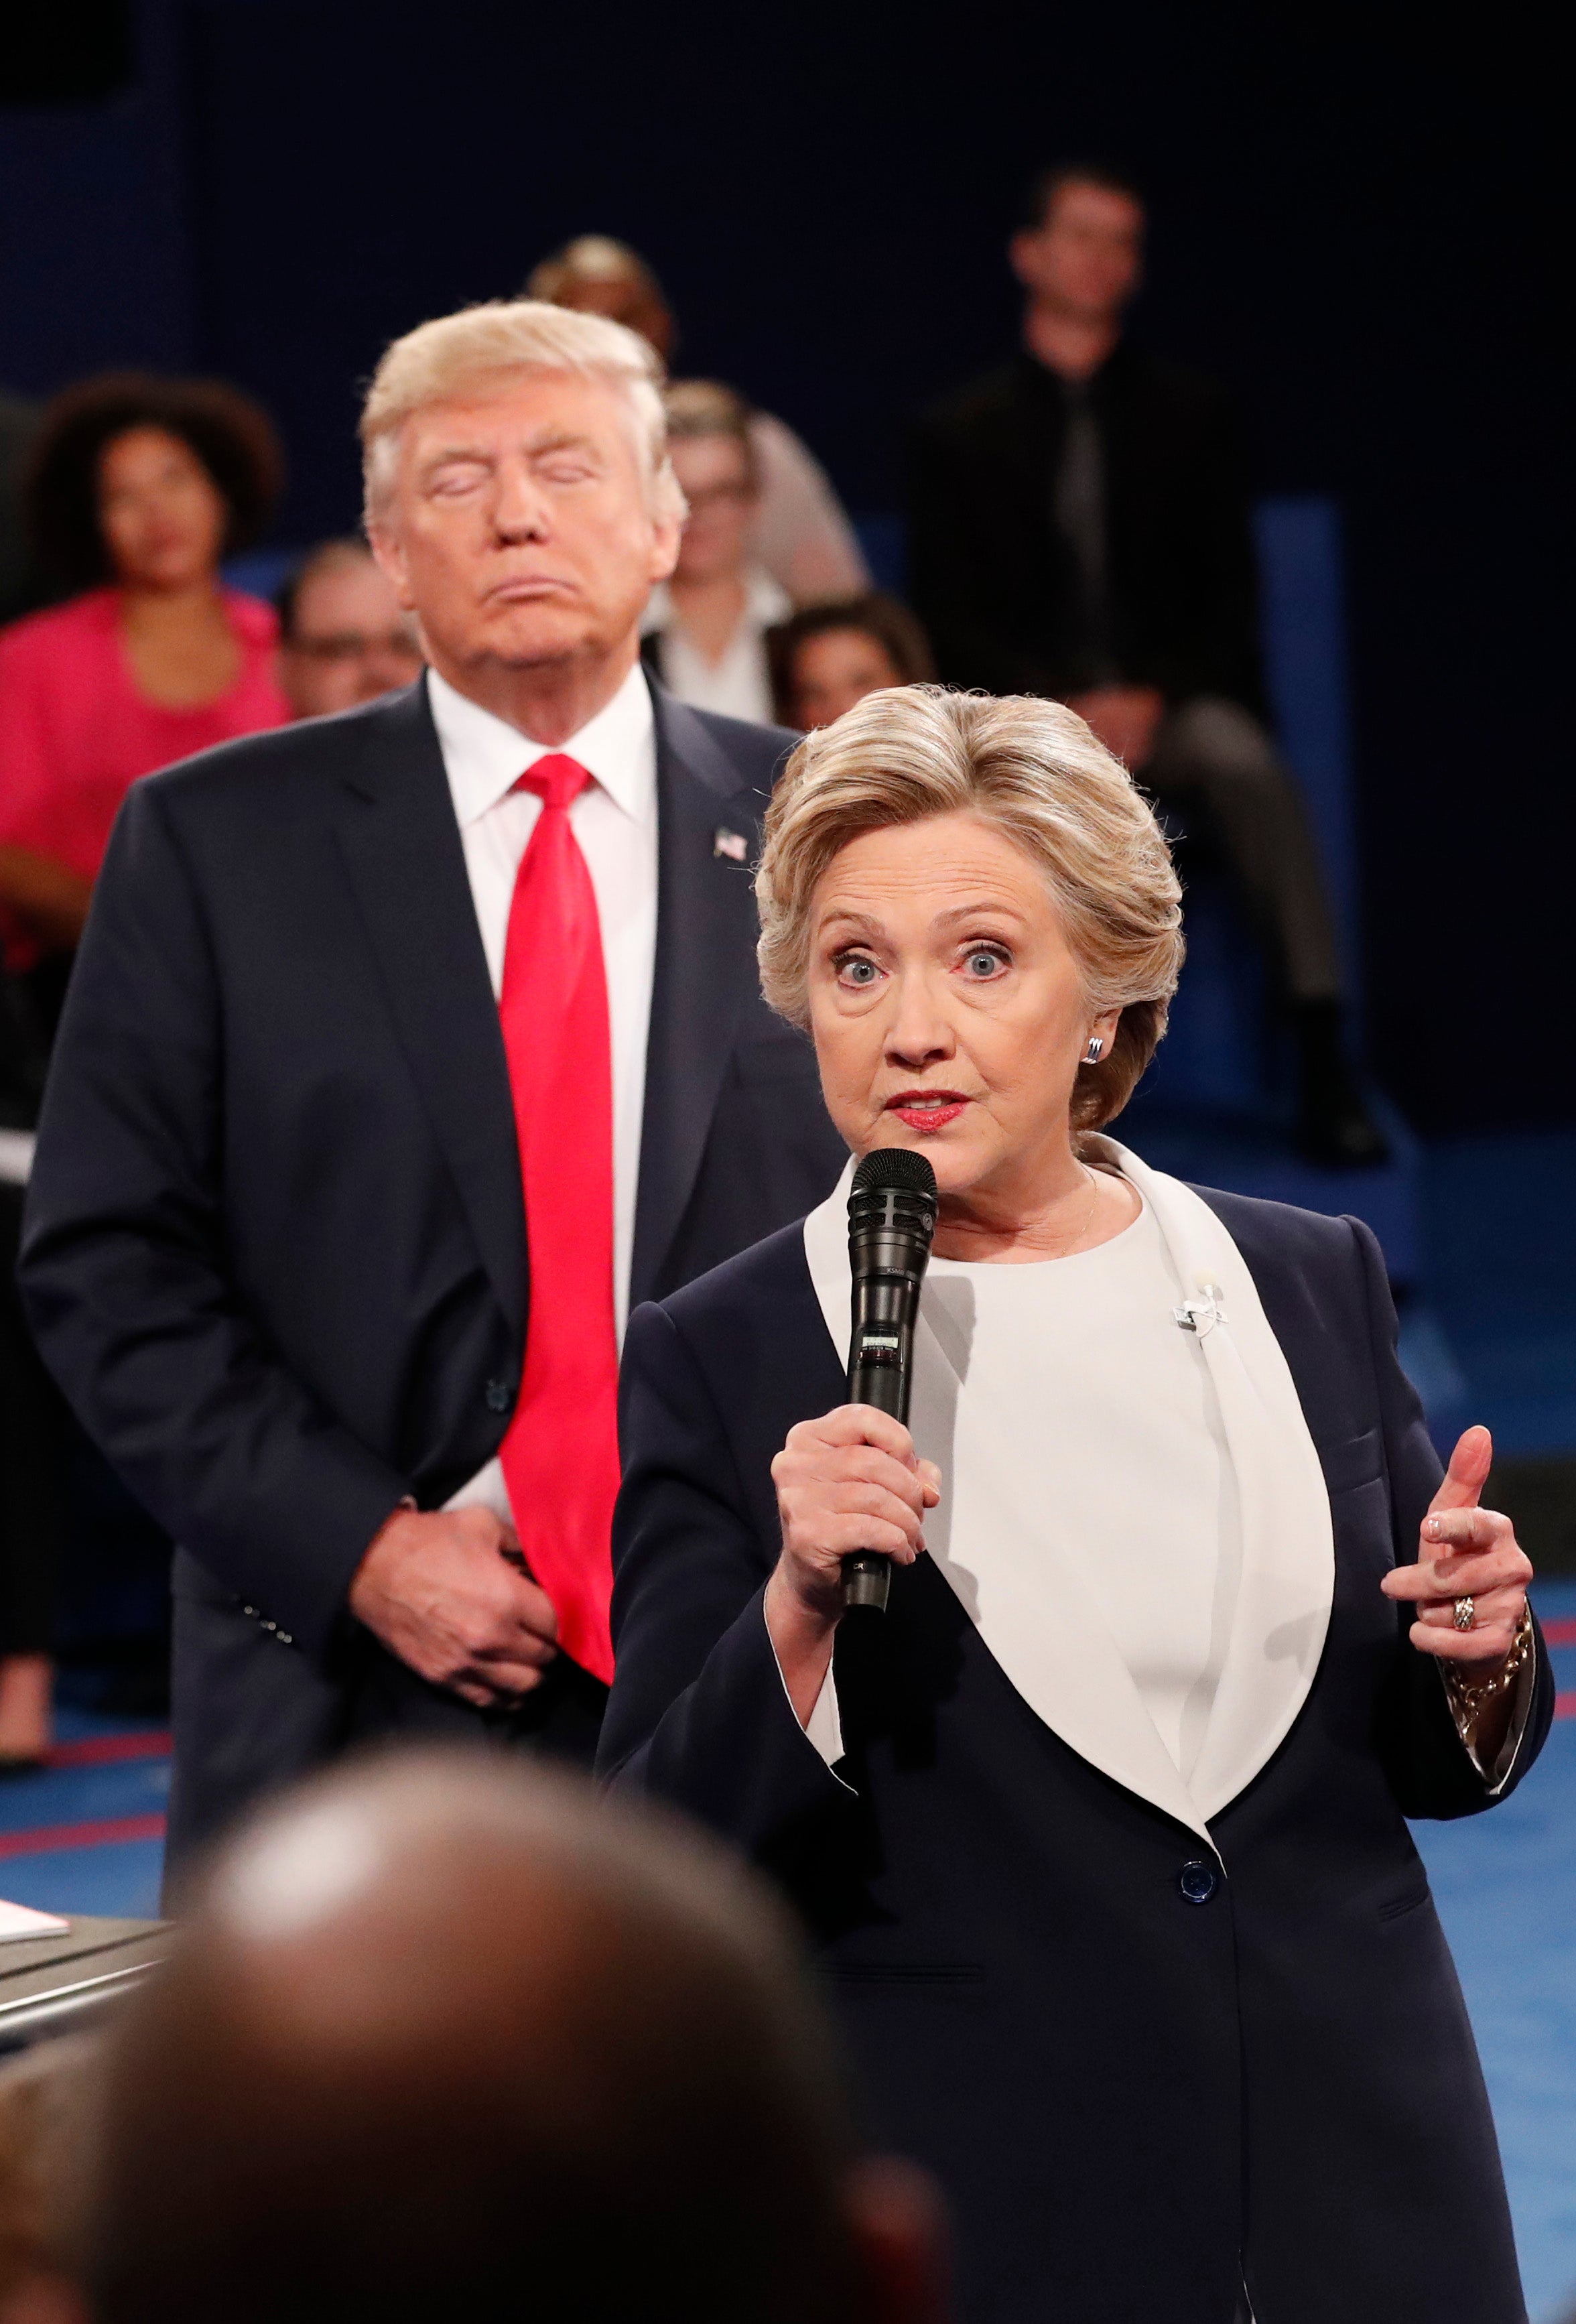 In Case You Missed It - Here's A Full Recap Of The Second Presidential Debate
